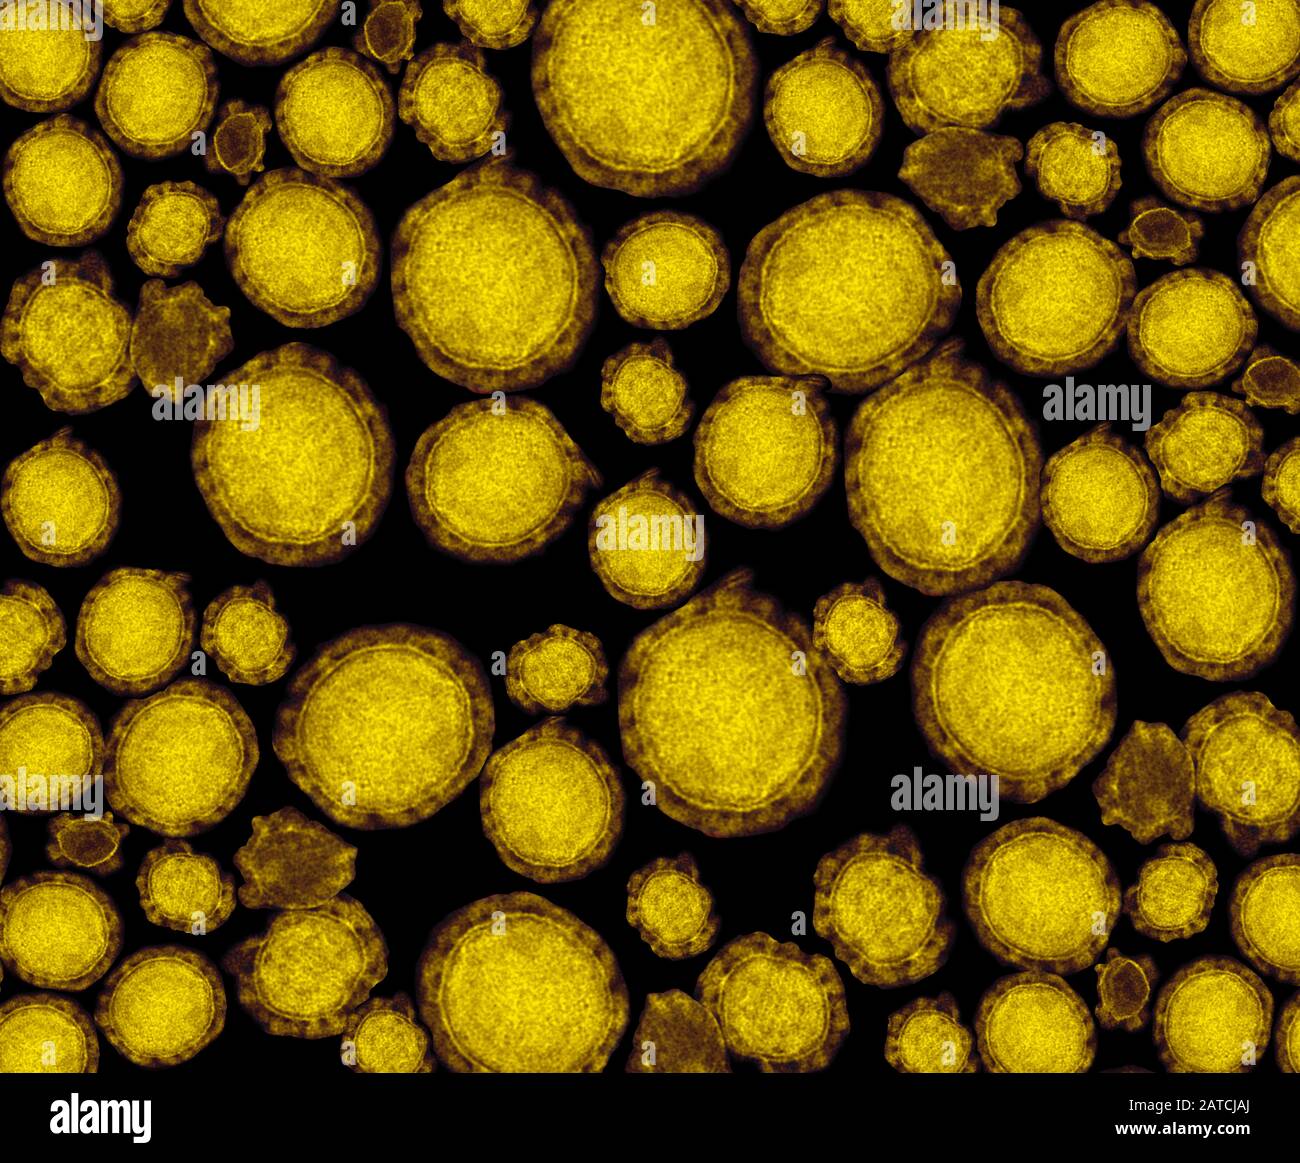 detail of ultraestructure of deadly coronavirus particles under transmission electron microscopy (TEM) Stock Photo